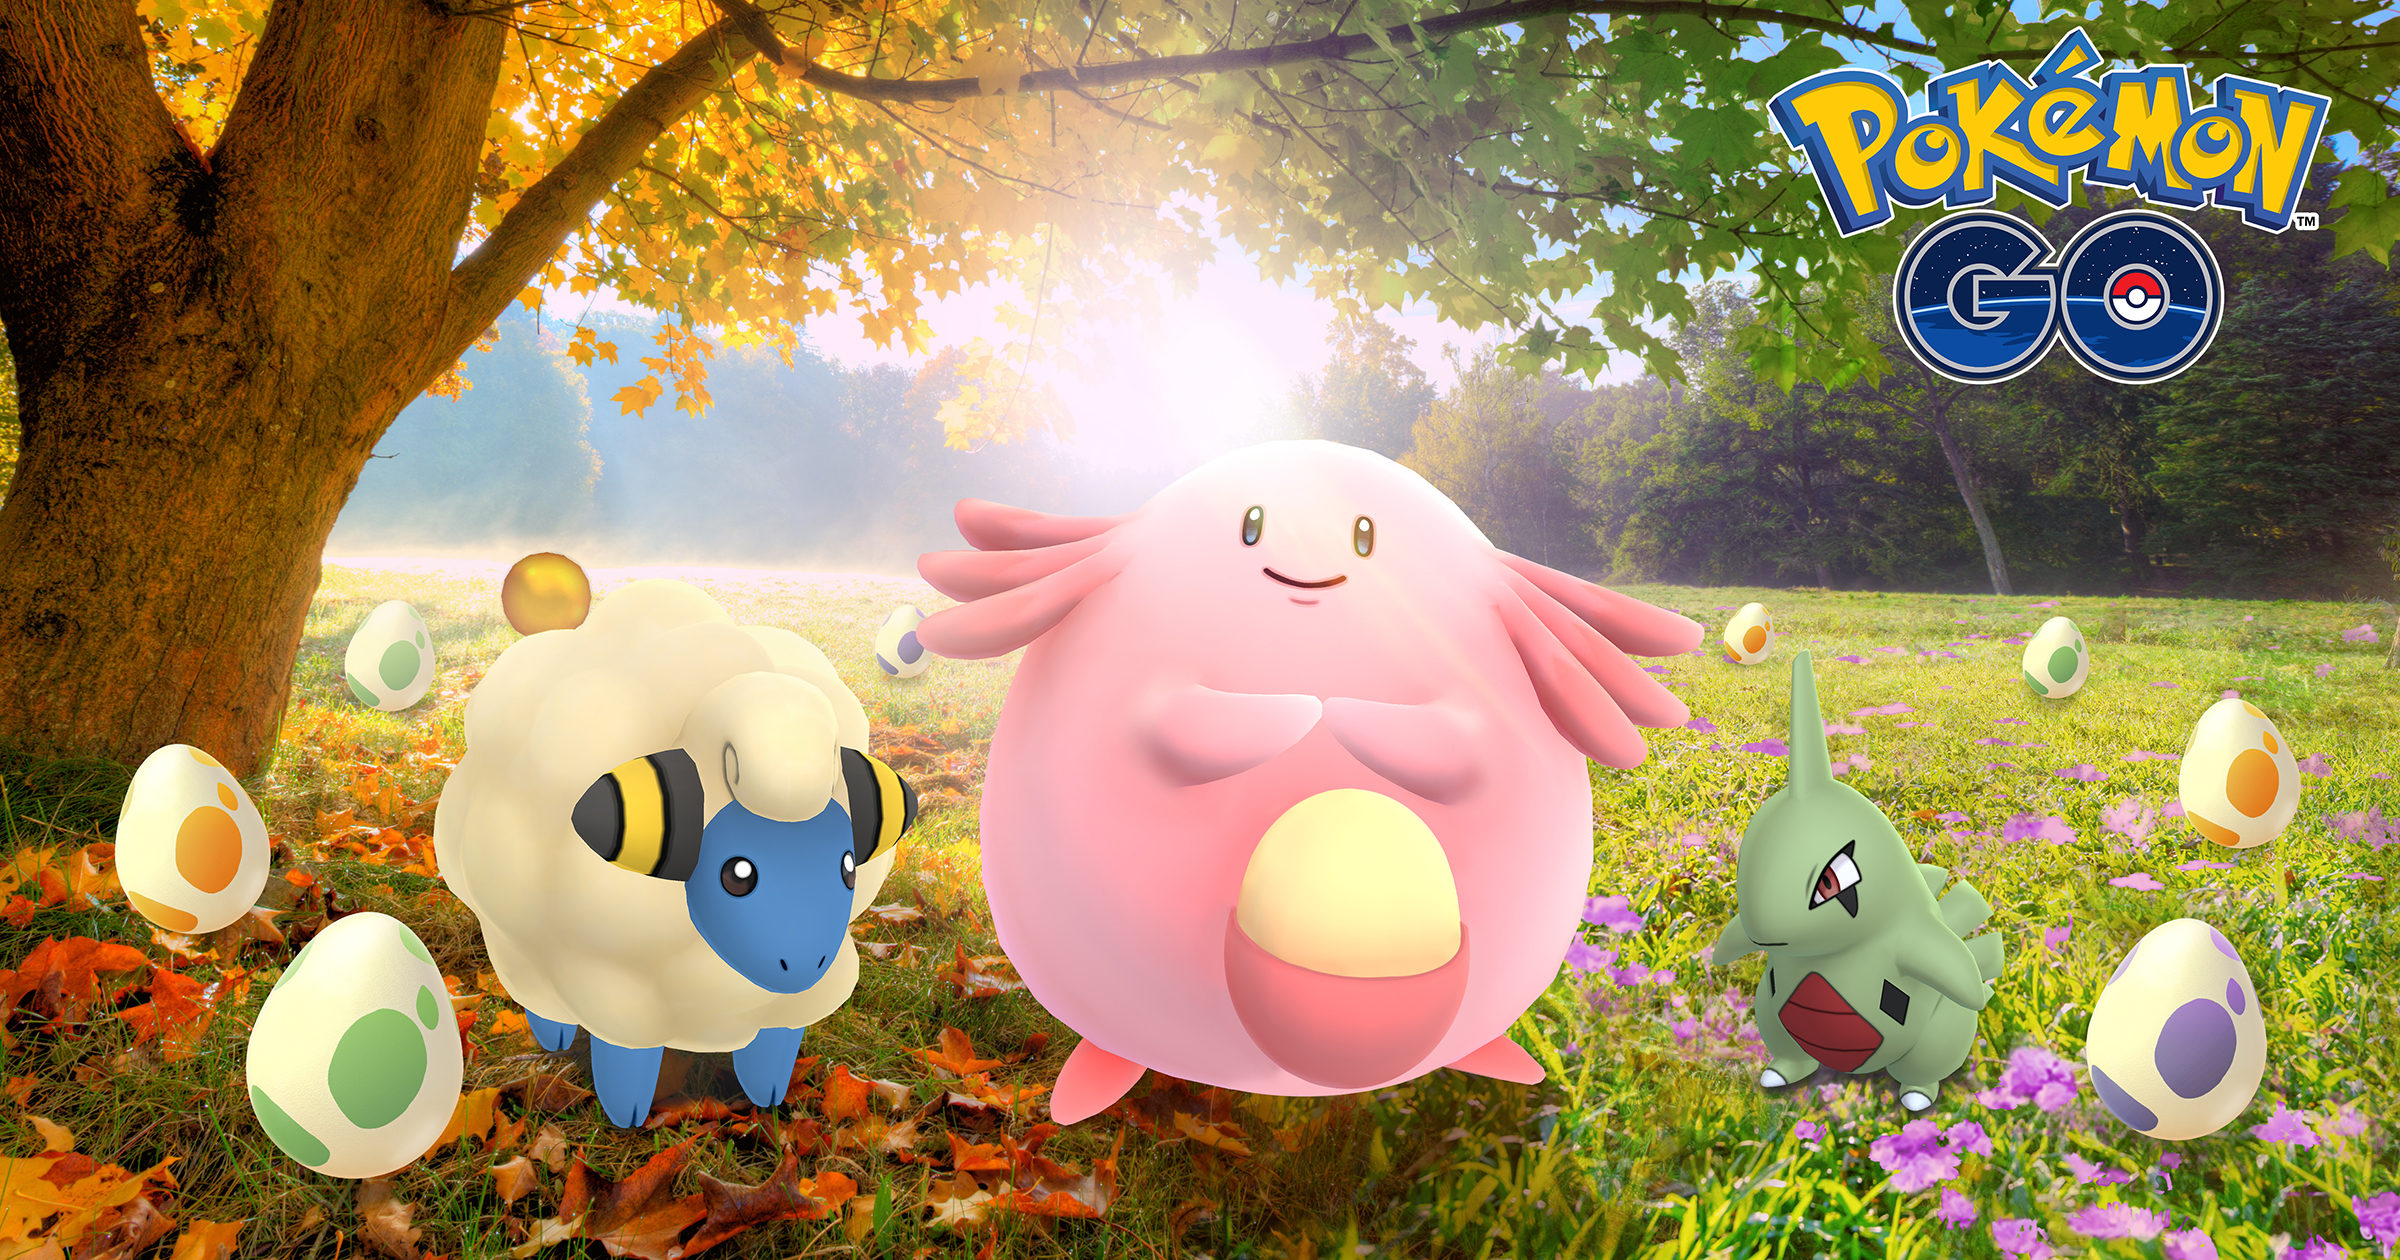 pokemon go new equinox event can get you double stardust and special eggs